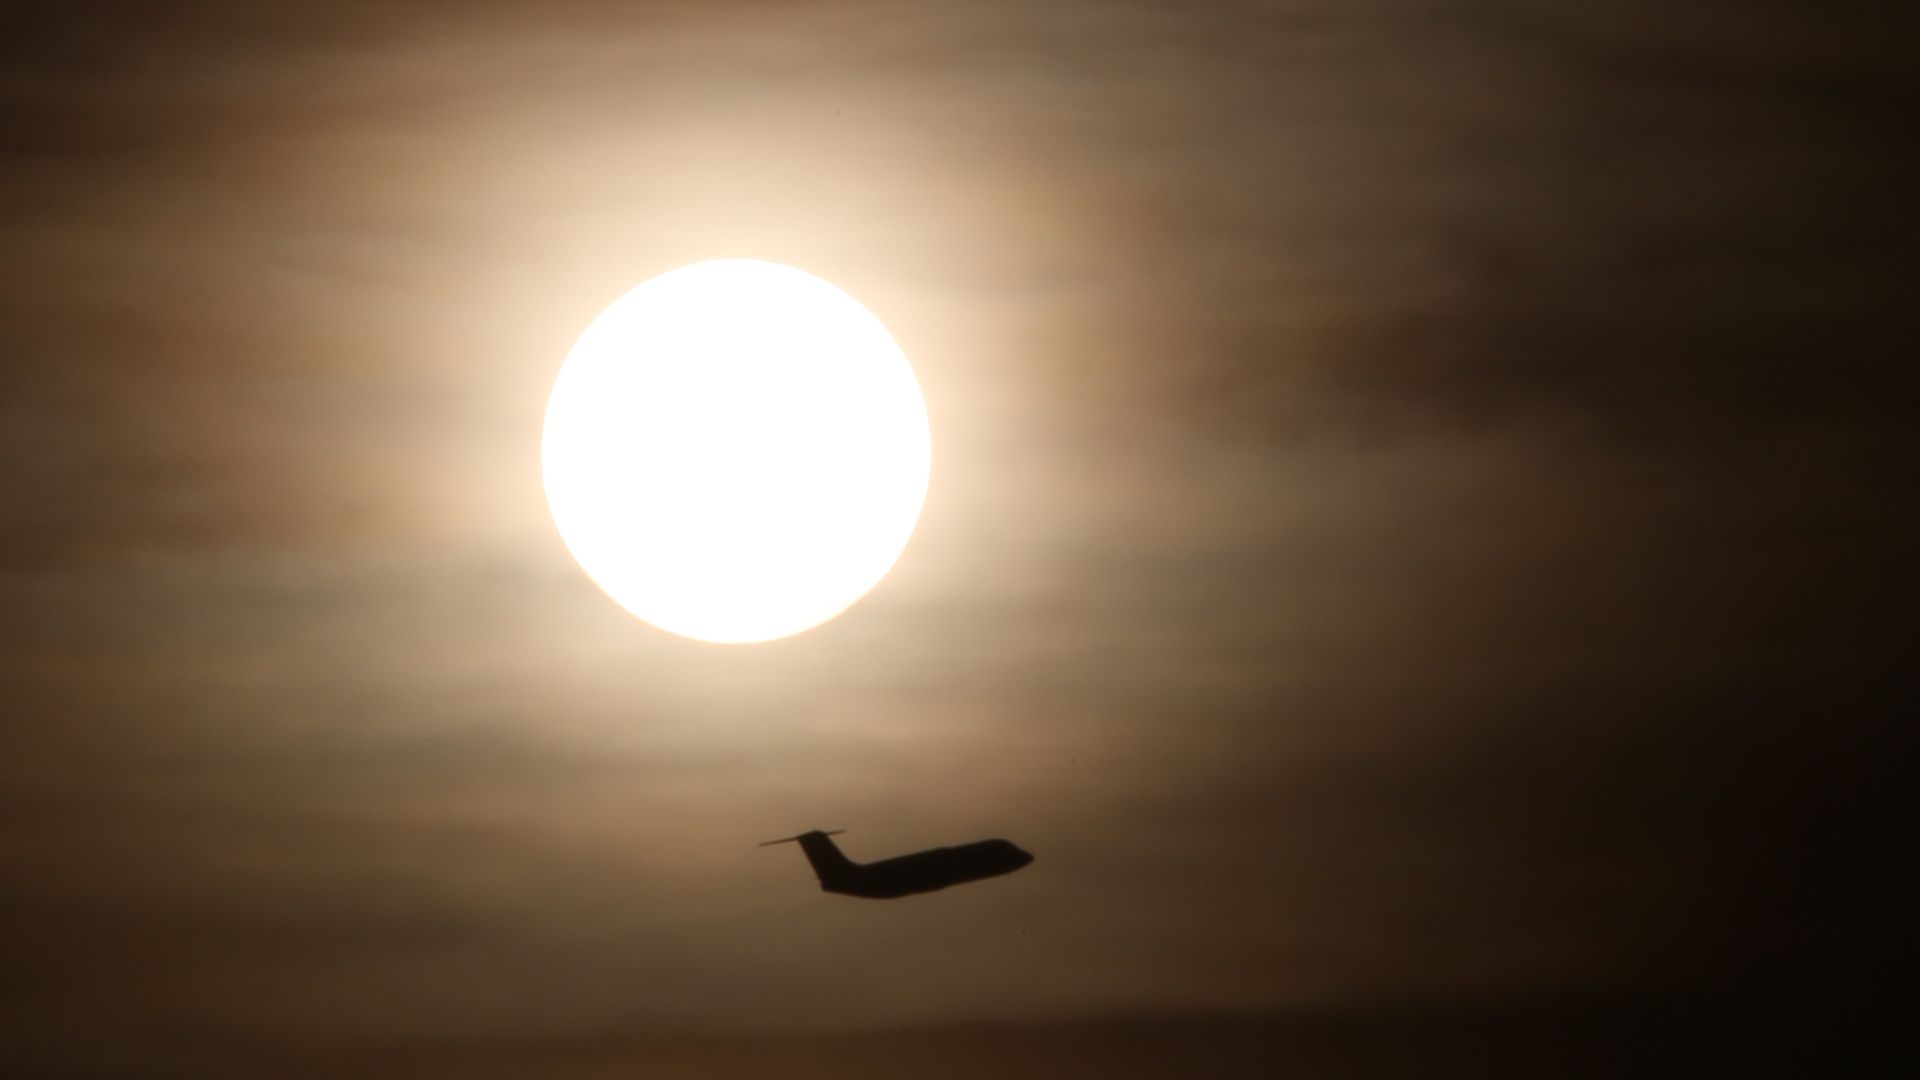 Plane flying across the sky with sun in the distance